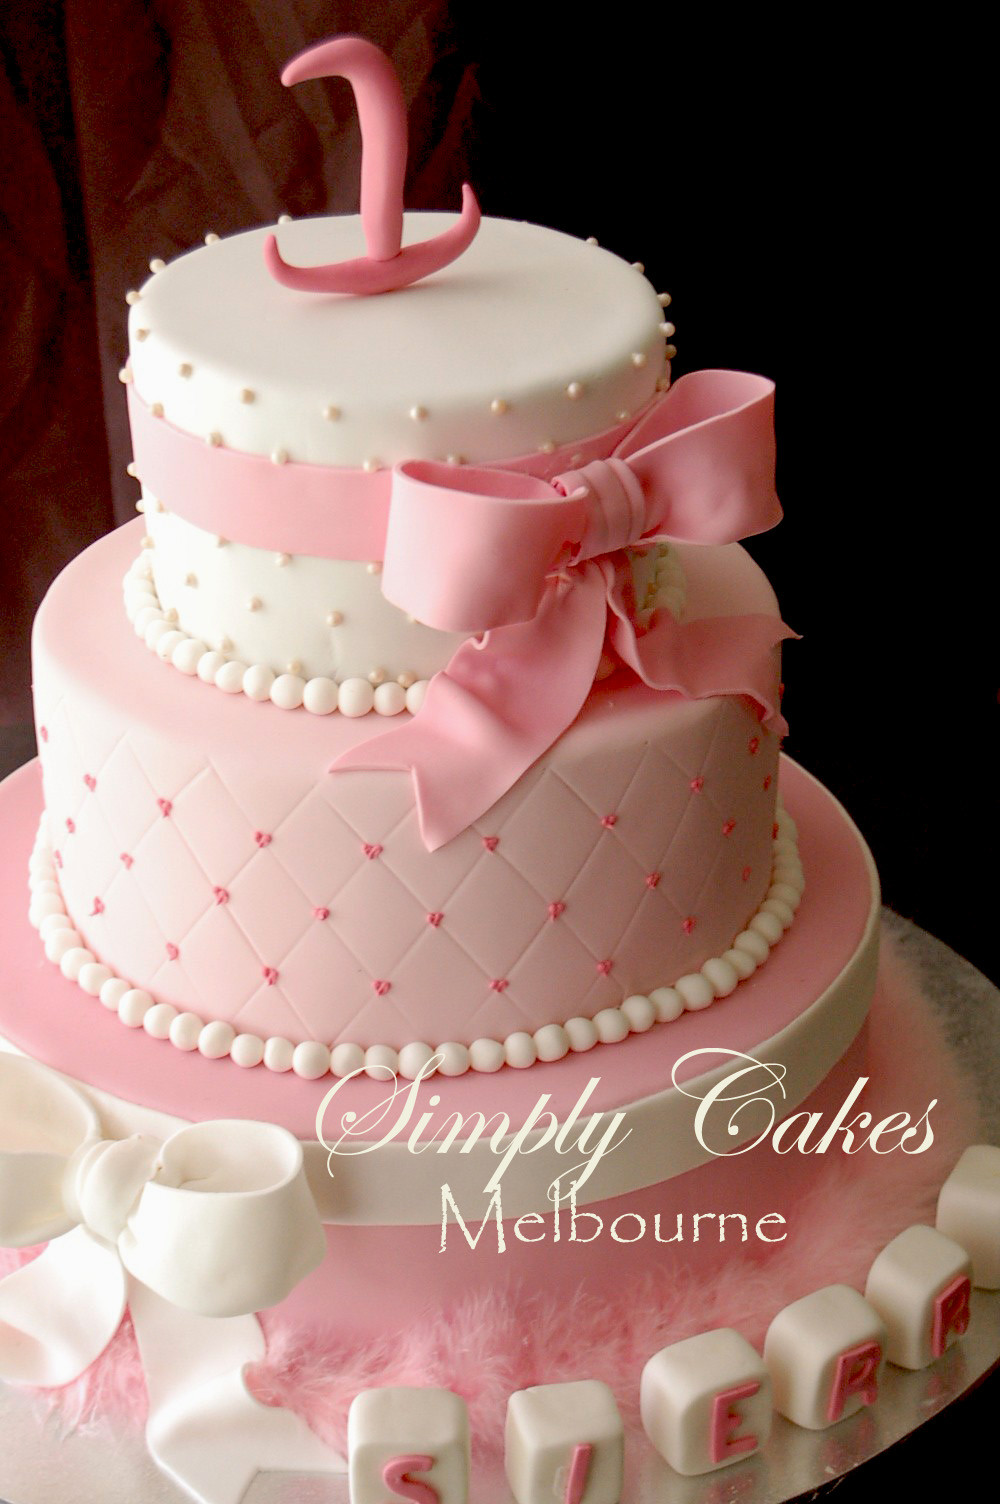 3 Tier Birthday Cake
 Cooking In Melbourne Sierra s 3 tiers 1 st birthday cake